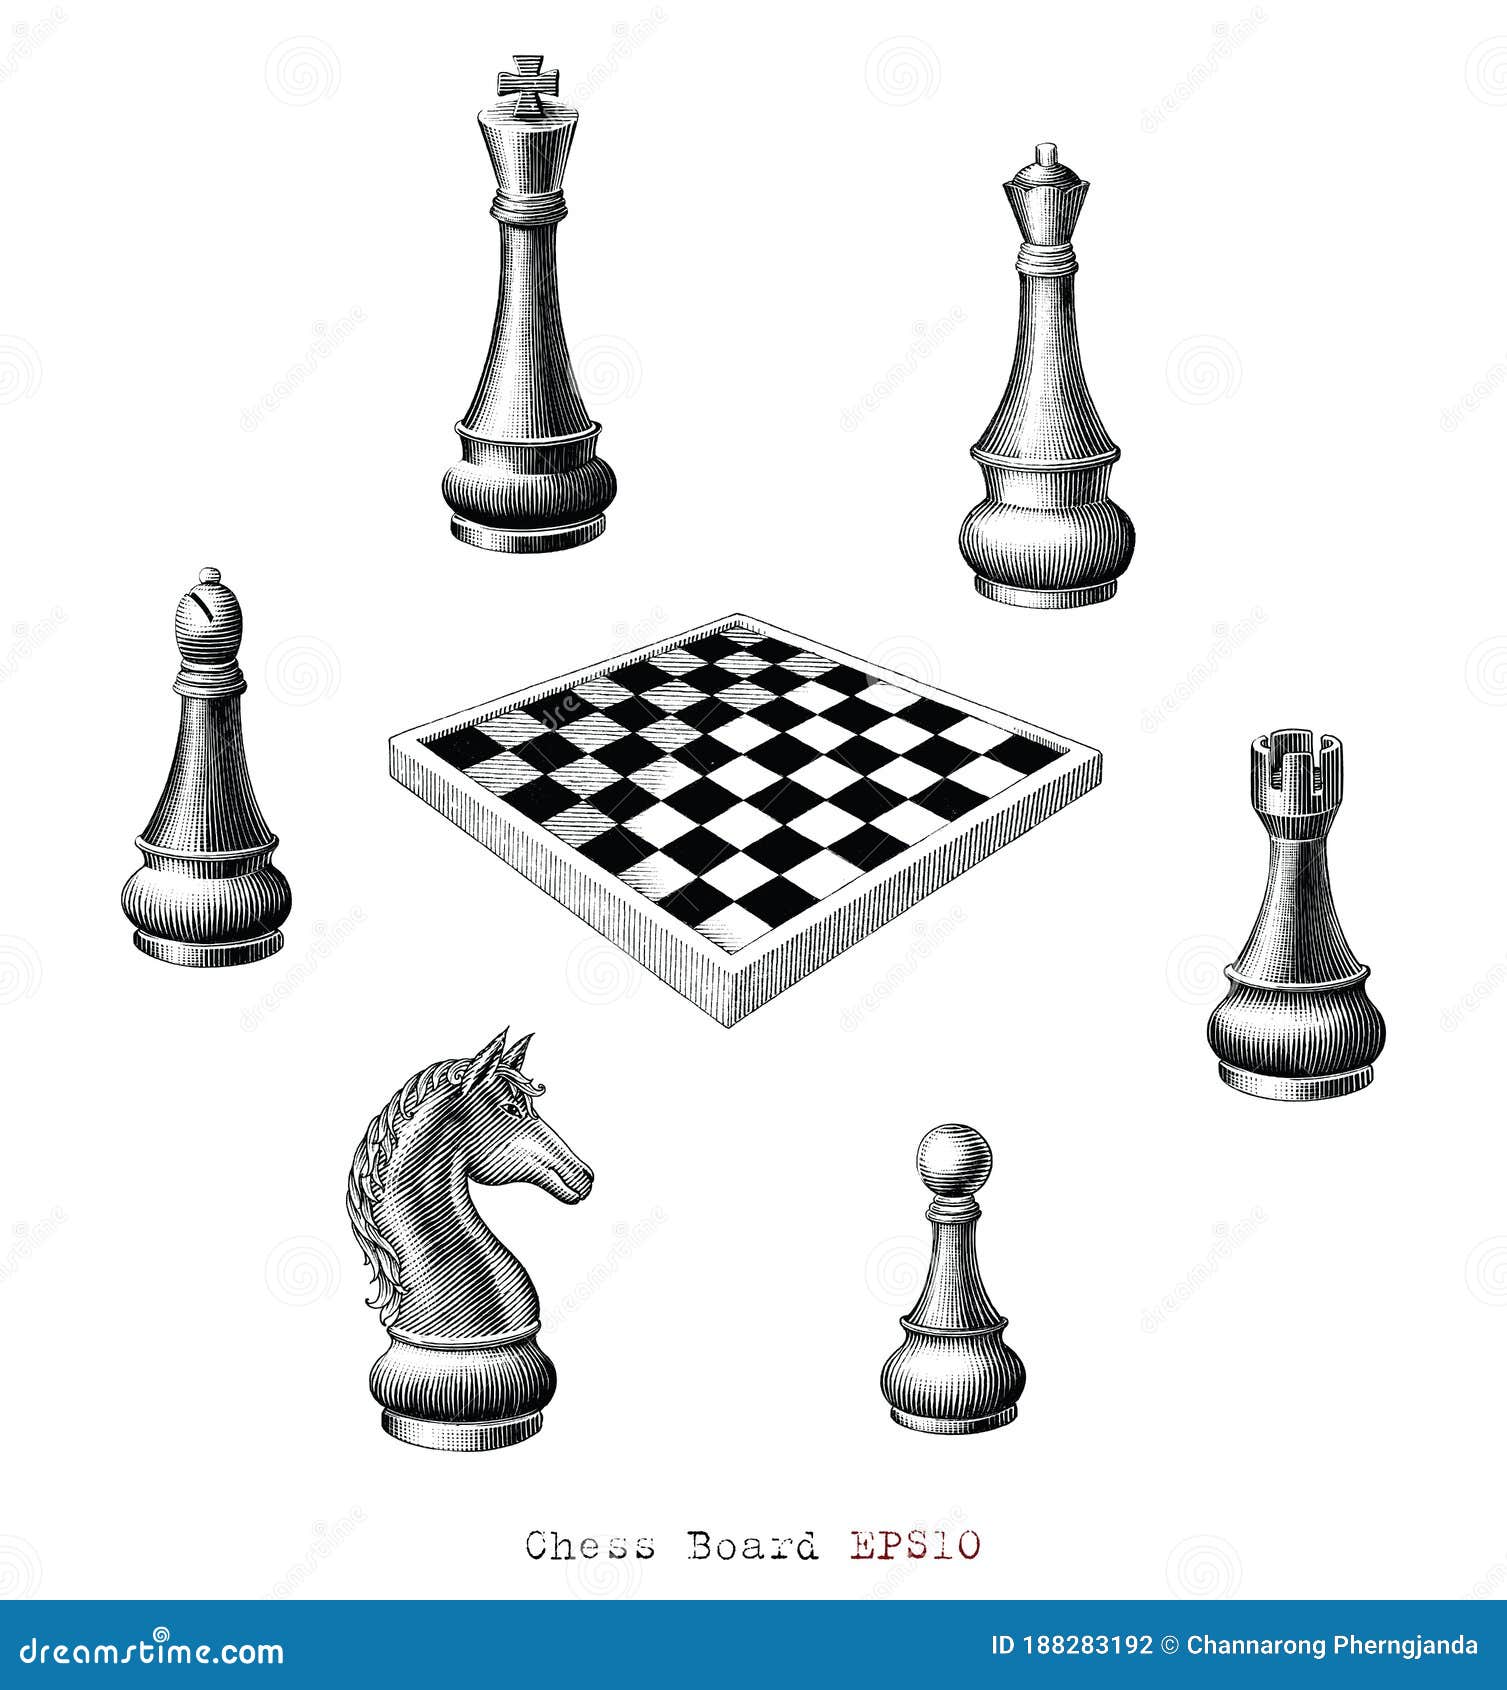 Chessboard Drawing With Figures. Royalty Free SVG, Cliparts, Vetores, e  Ilustrações Stock. Image 53482193.